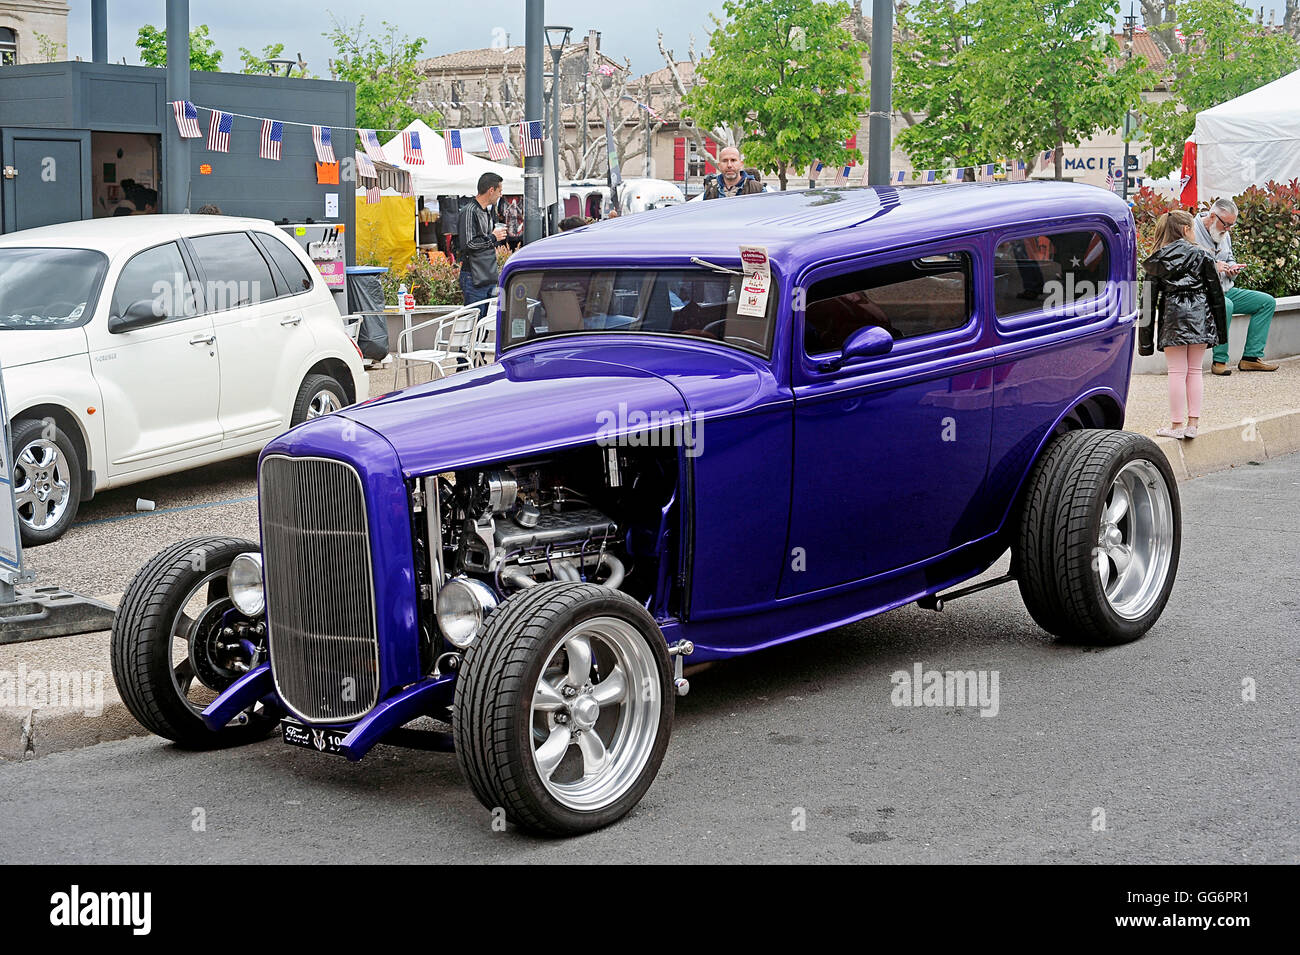 purple hot rod parked in a gathering of American motorcycles in Beaucaire in the French department of Gard Stock Photo